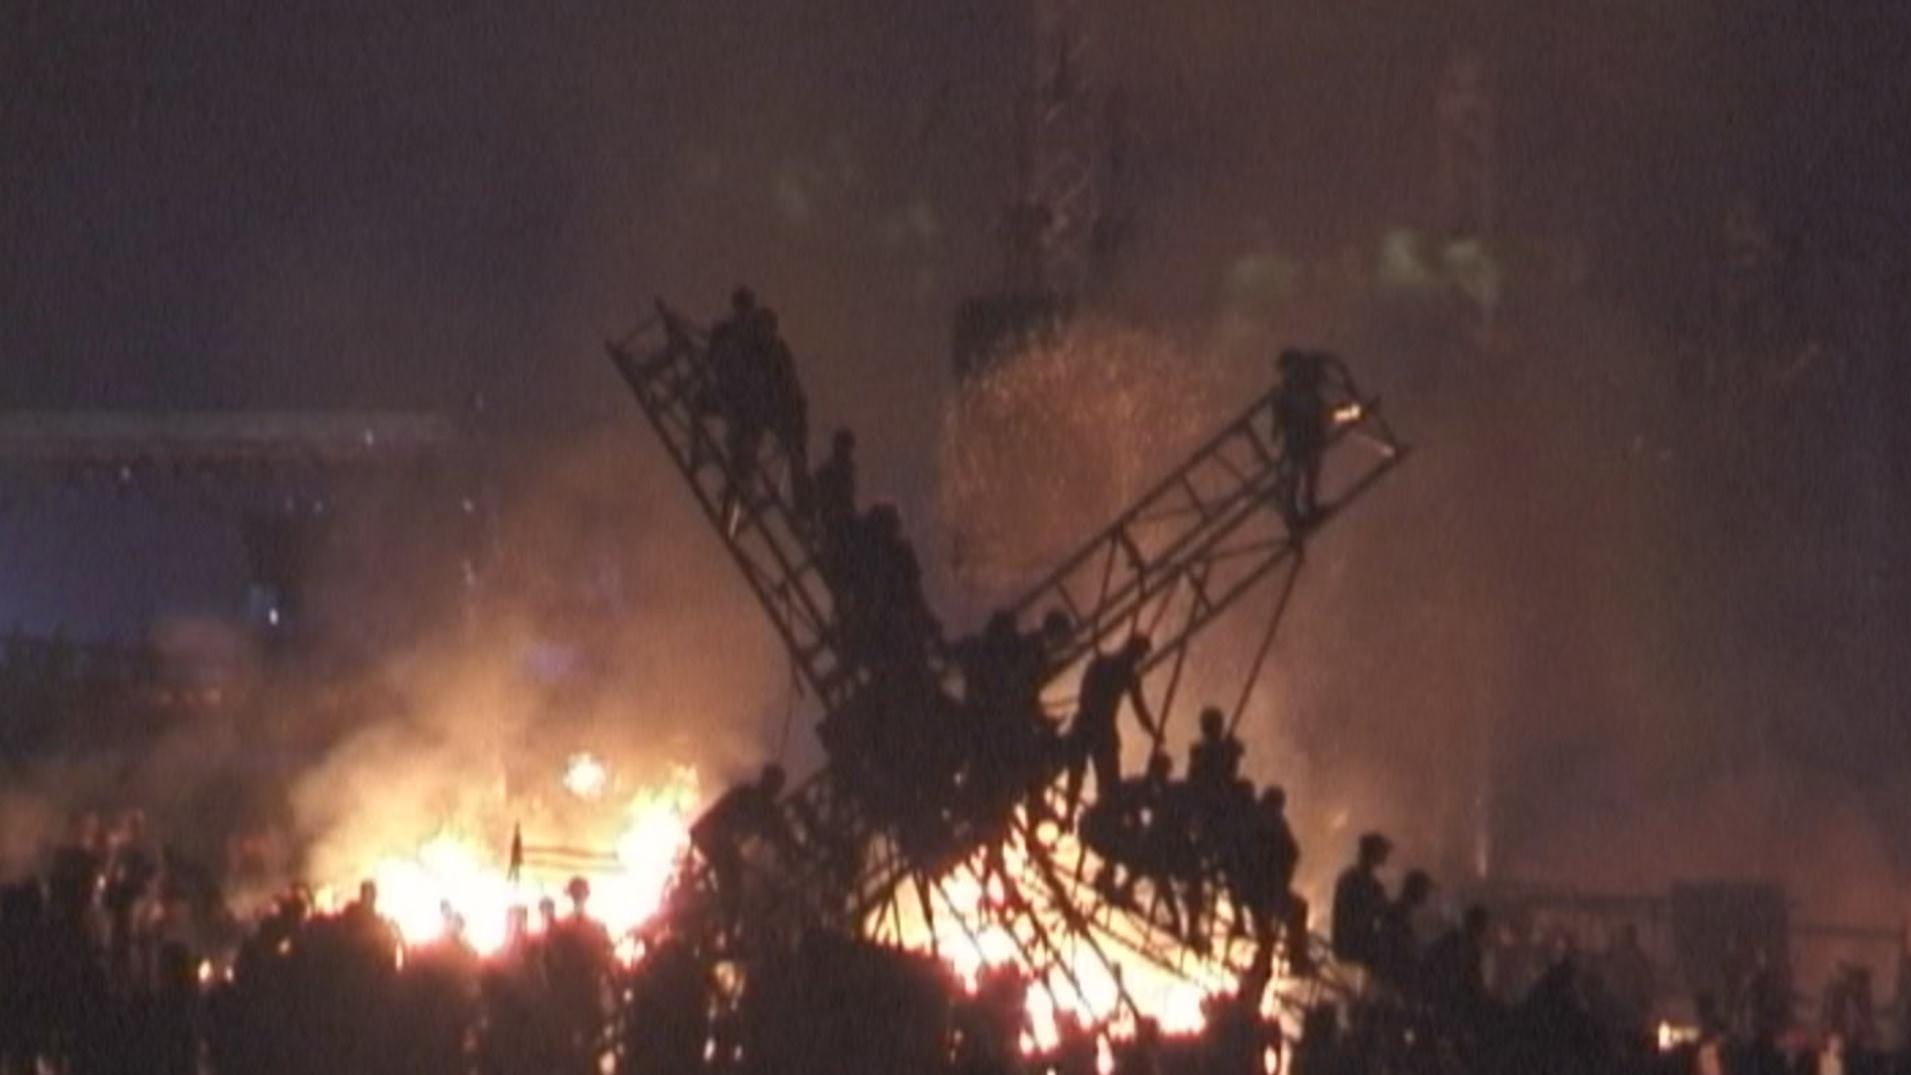 Fires erupted Sunday, July 25, 1999 as Woodstock 99 came to a close.